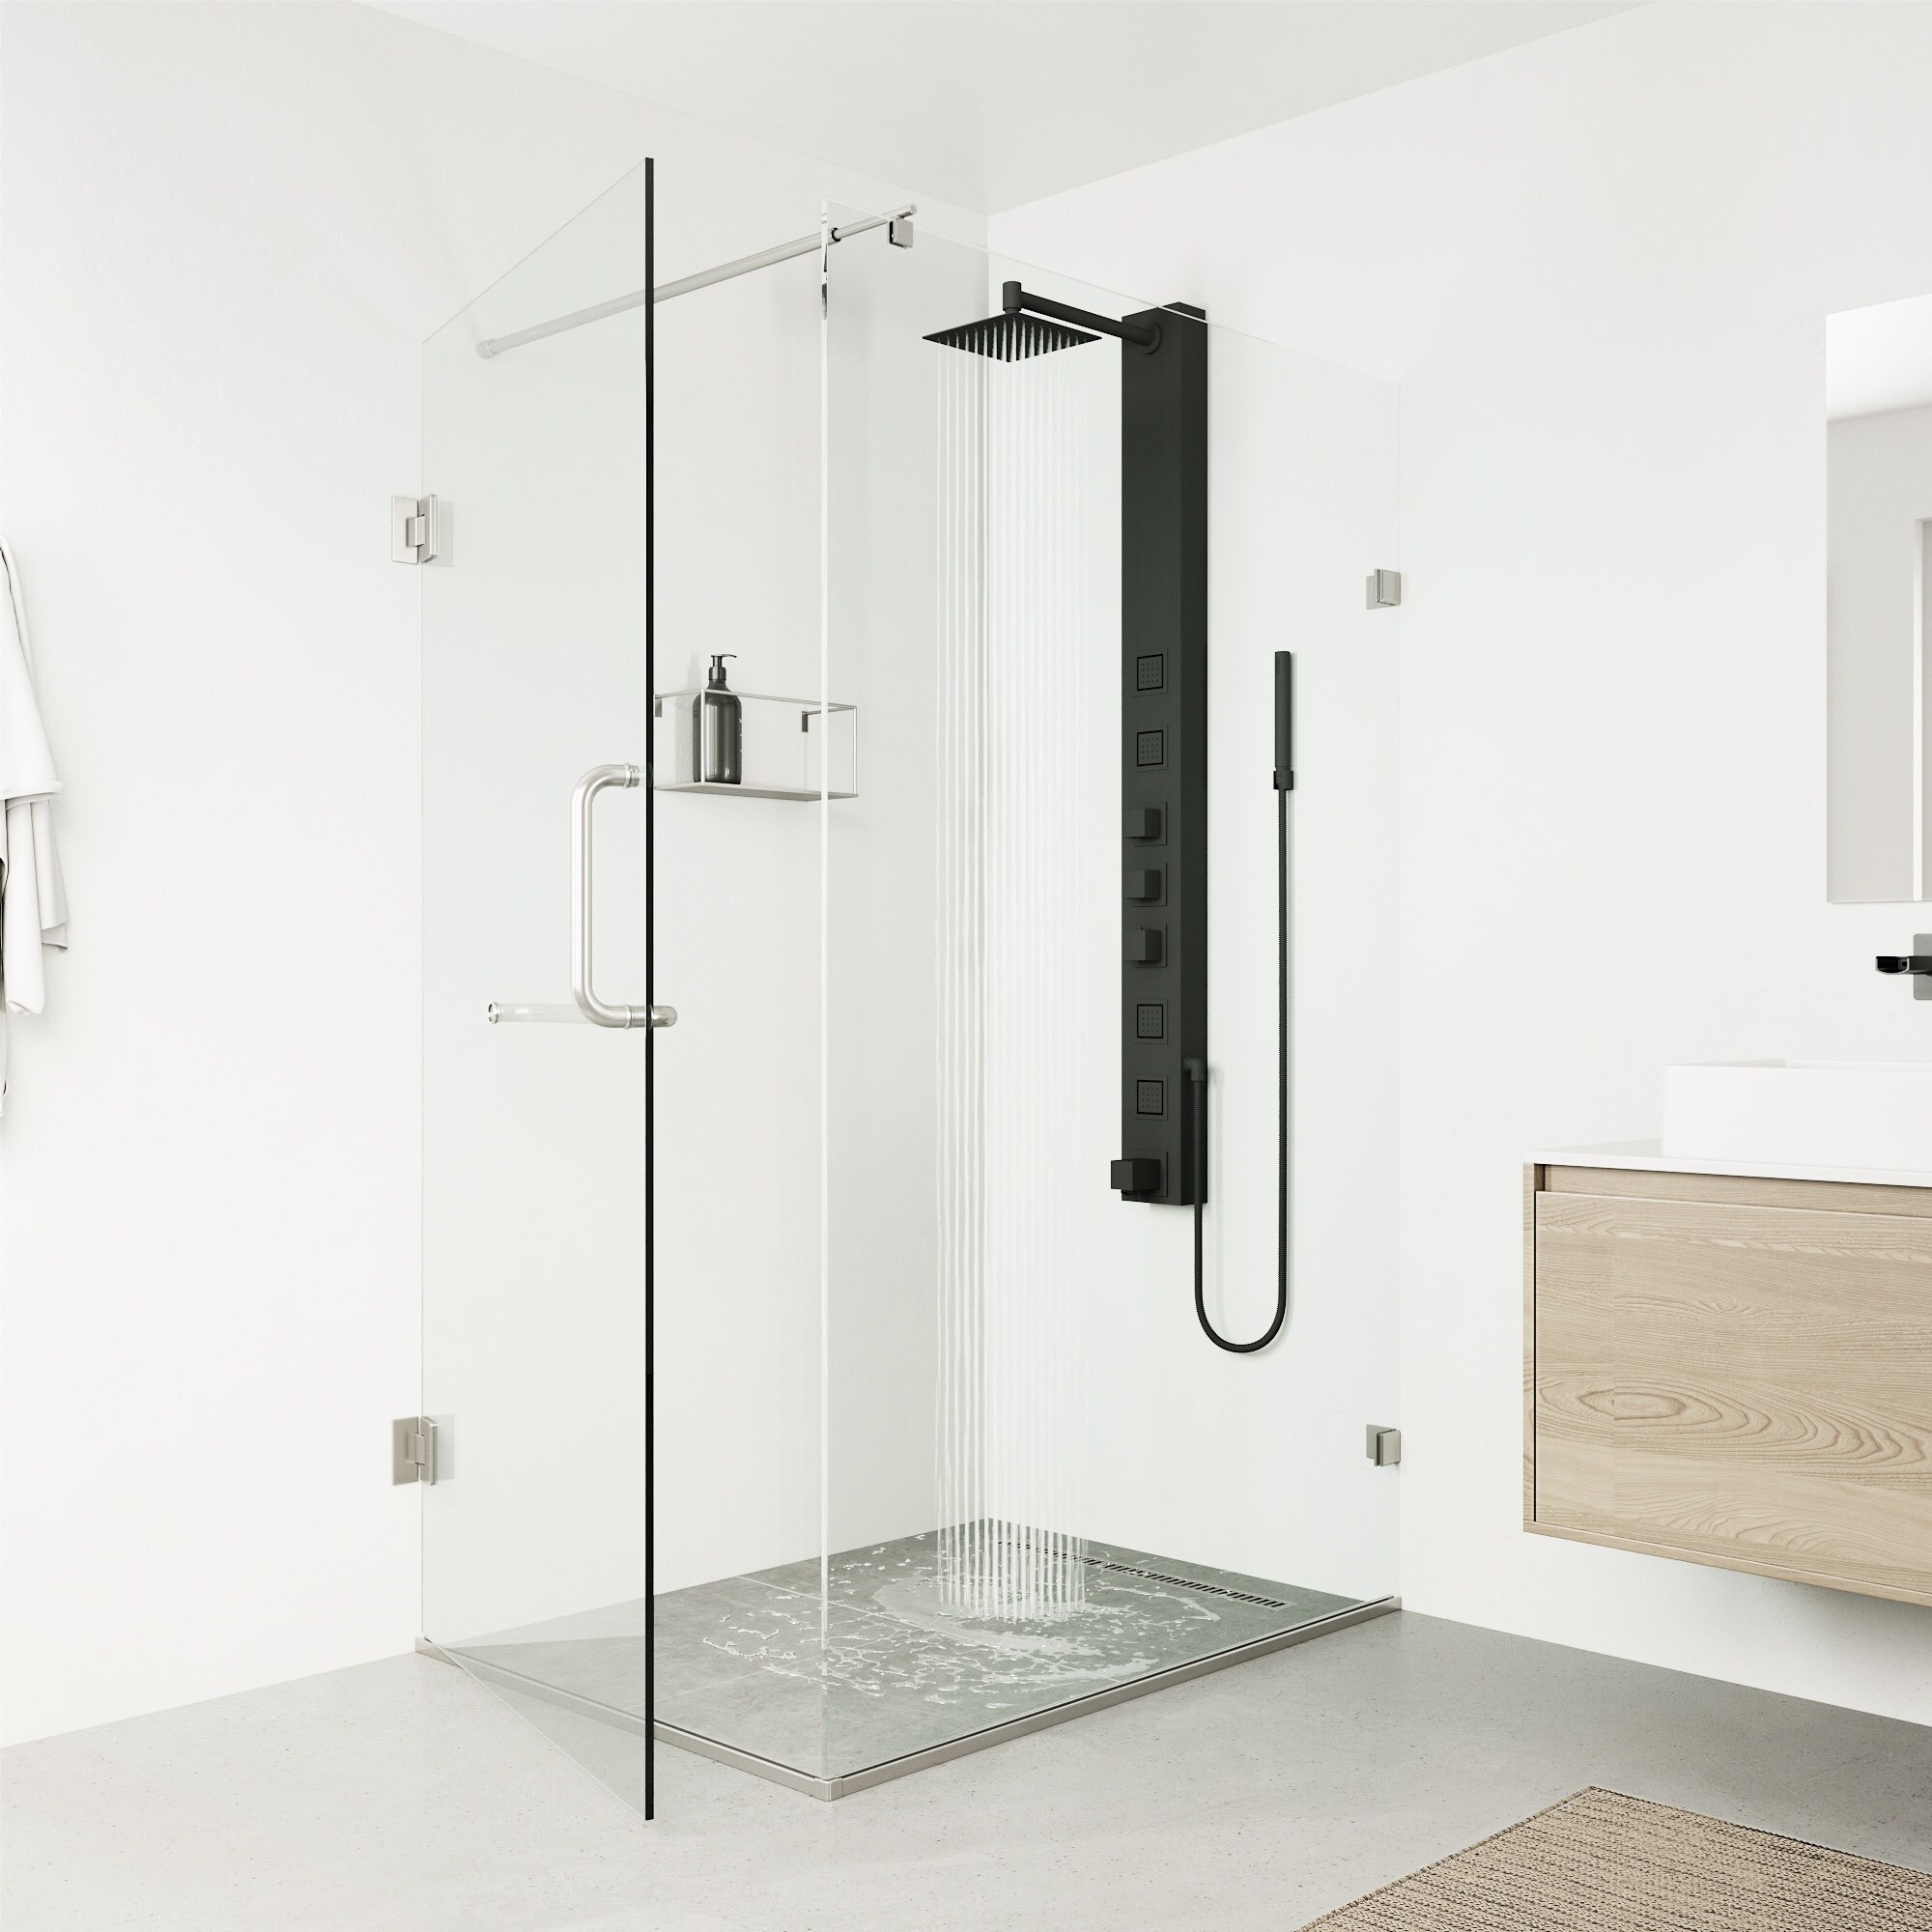 https://ak1.ostkcdn.com/images/products/is/images/direct/4e1d0b509452c549f0db70e2da5f9d3b02a09fcb/Vigo-VG08023-Bowery-Thermostatic-Shower-System-with-Shower-Head%2C-Hand.jpg